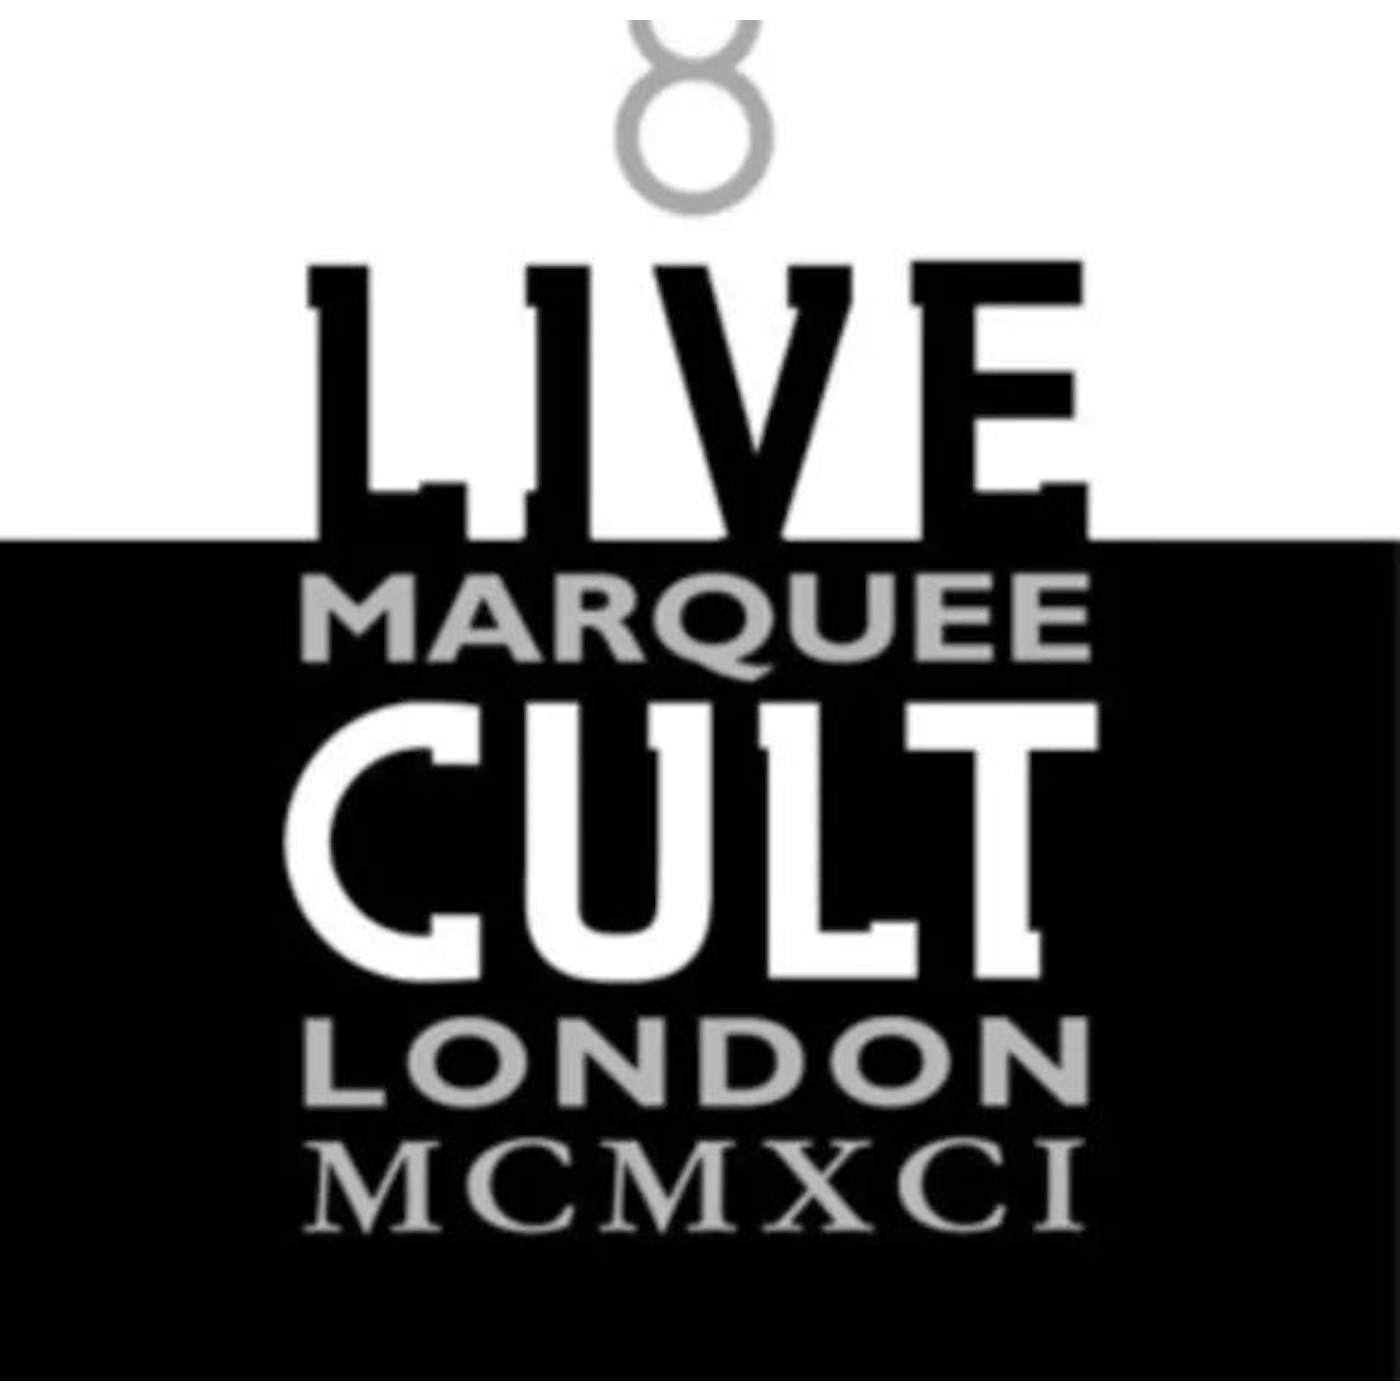 The Cult Cult - Live Cult Marquee London MCMXCI